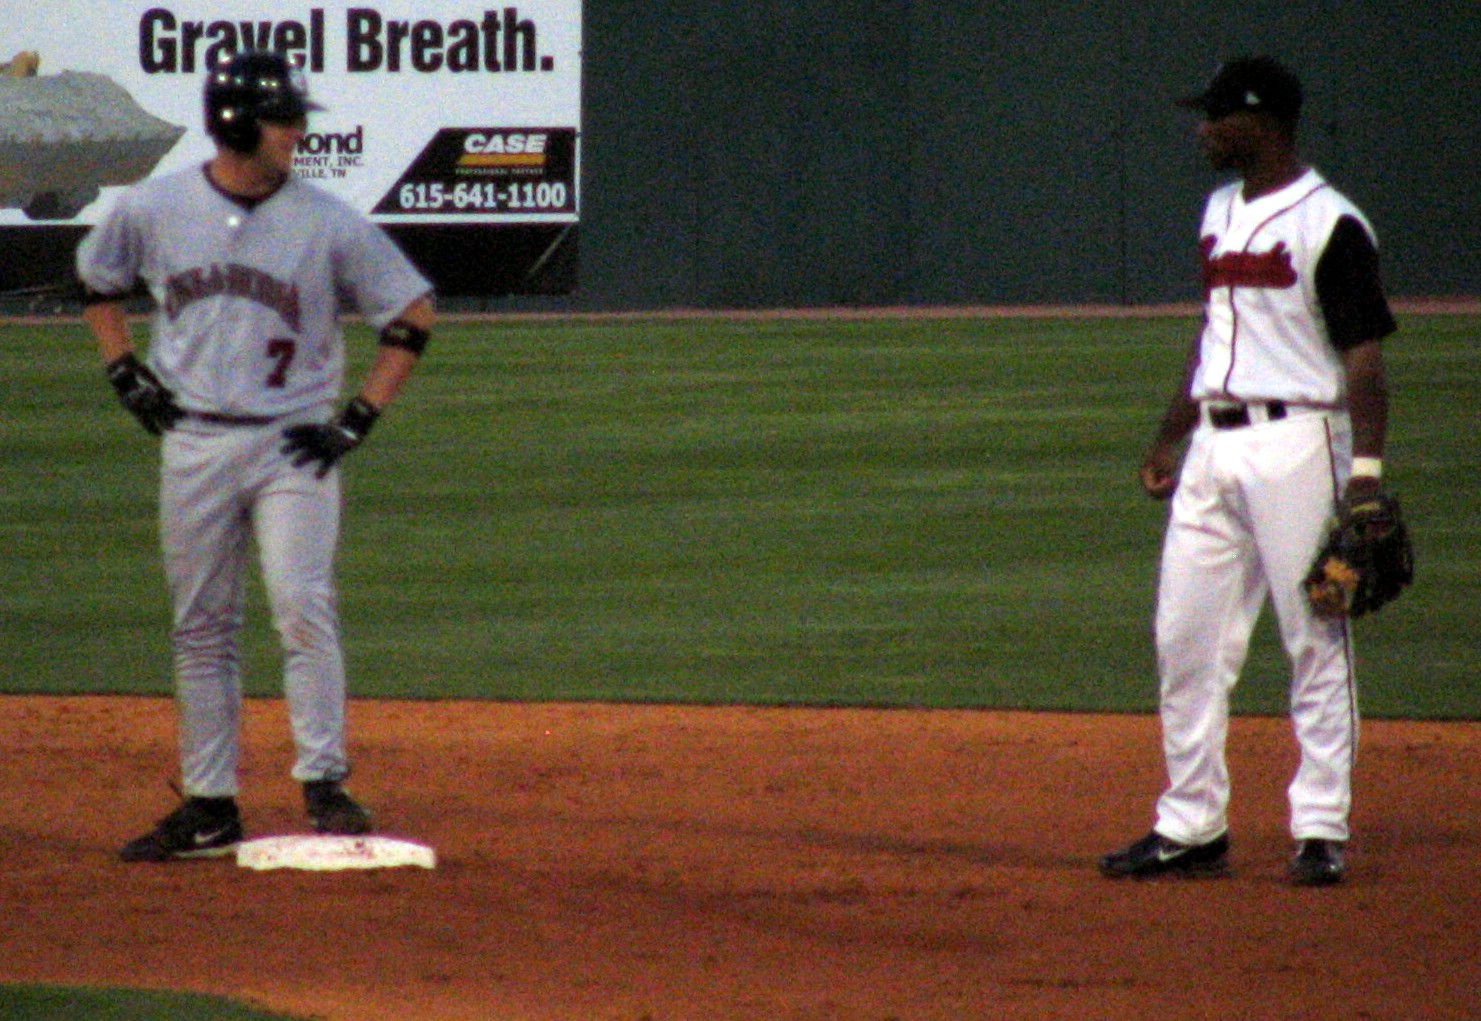 the two baseball players are having a conversation